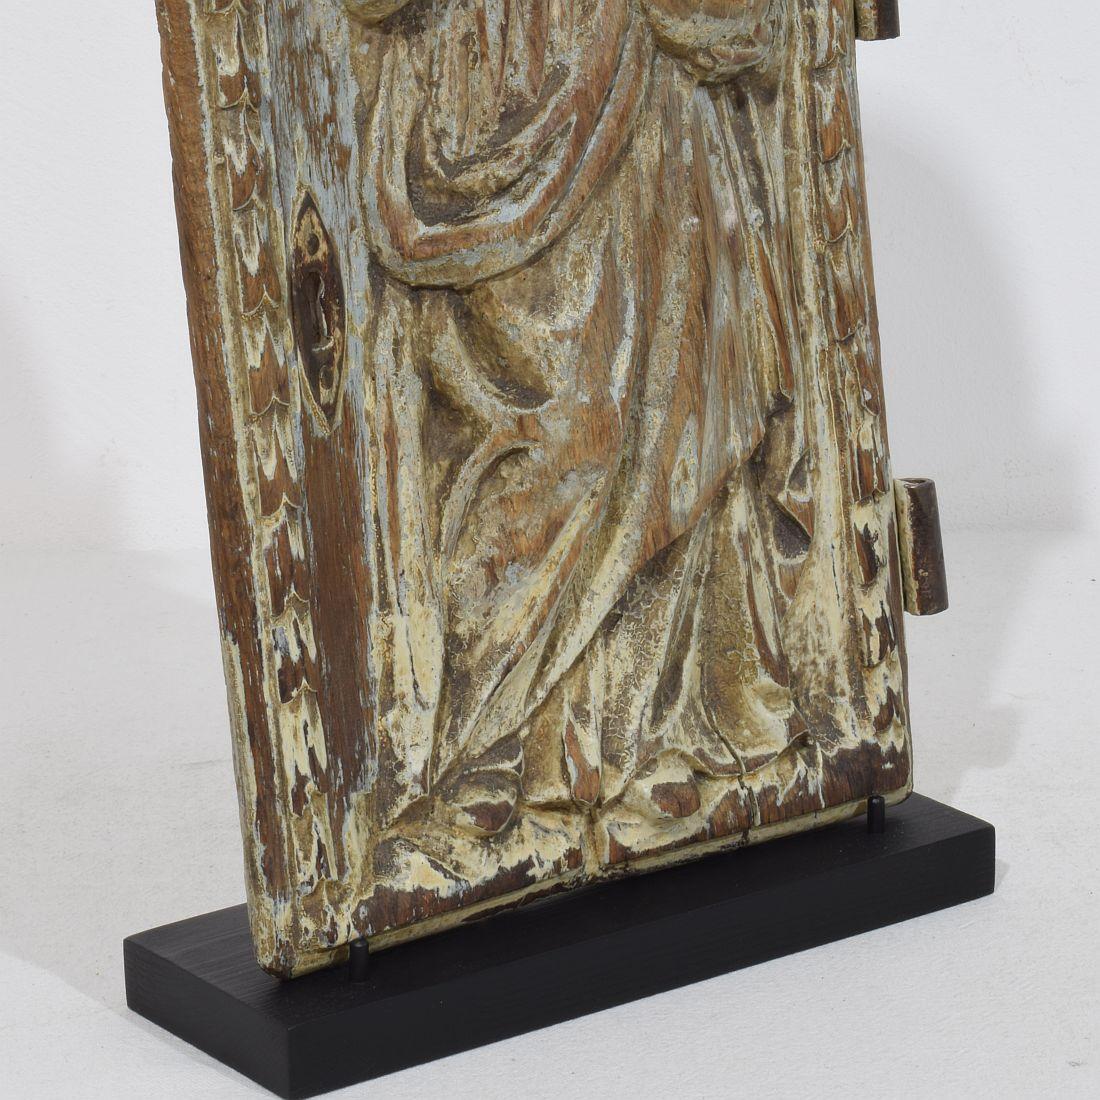 French 18th Century Wooden Tabernacle Door Depicting Christ / Salvator Mundi For Sale 5